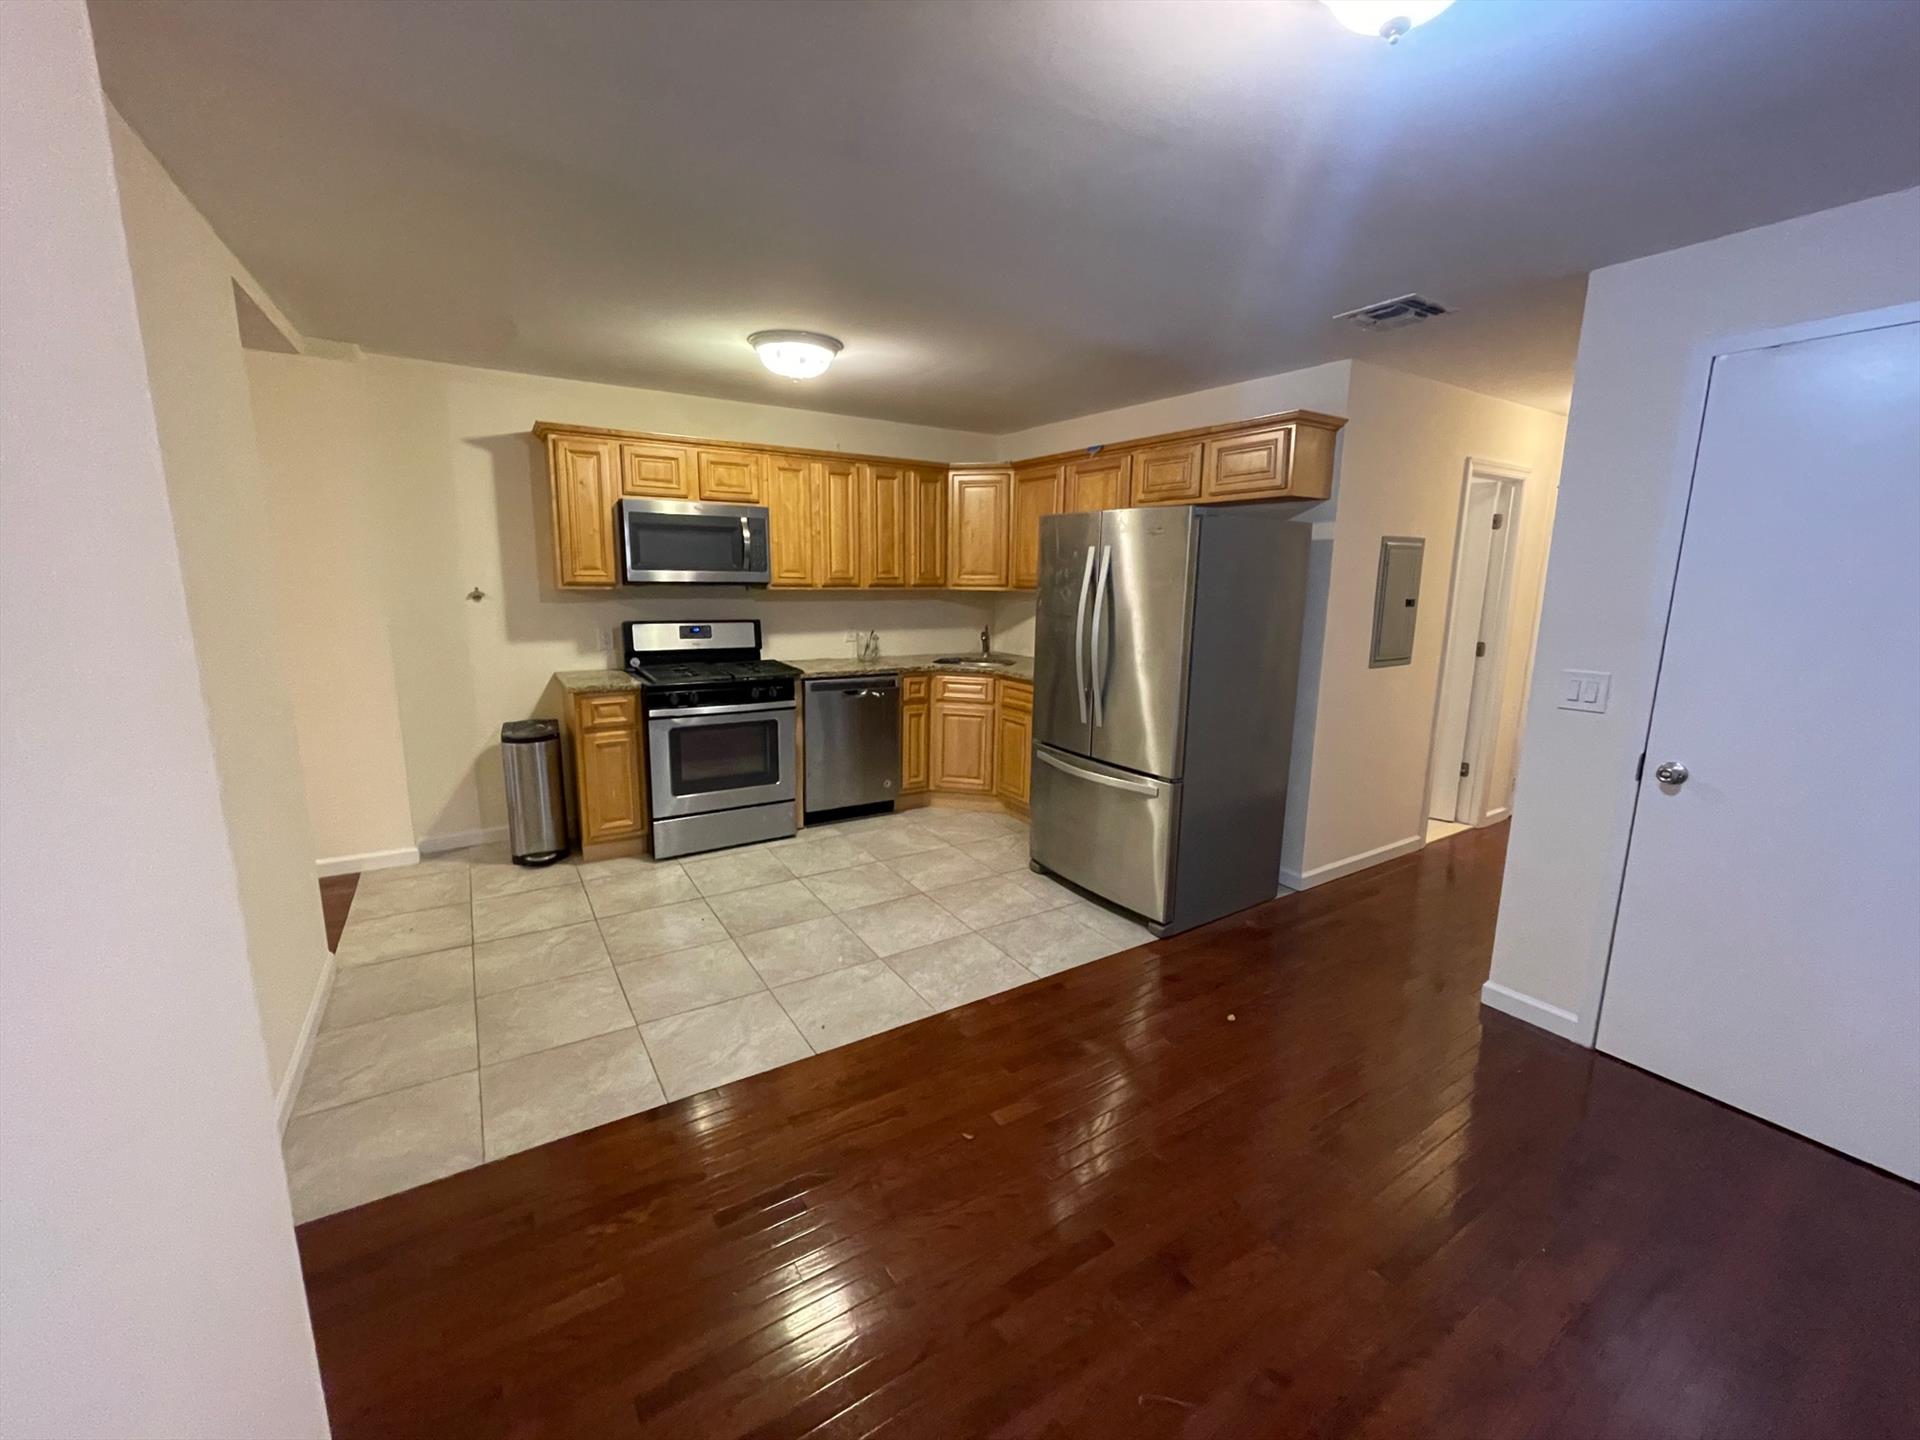 VACANT! You dont want to miss this 4 bed 2 bath unit on desired Washington St! Close to parks, restaurants, bus stops, path and more! Unit features hardwood floors, stainless steel appliances, and central air! Available ASAP. Tenant pays broker fee.